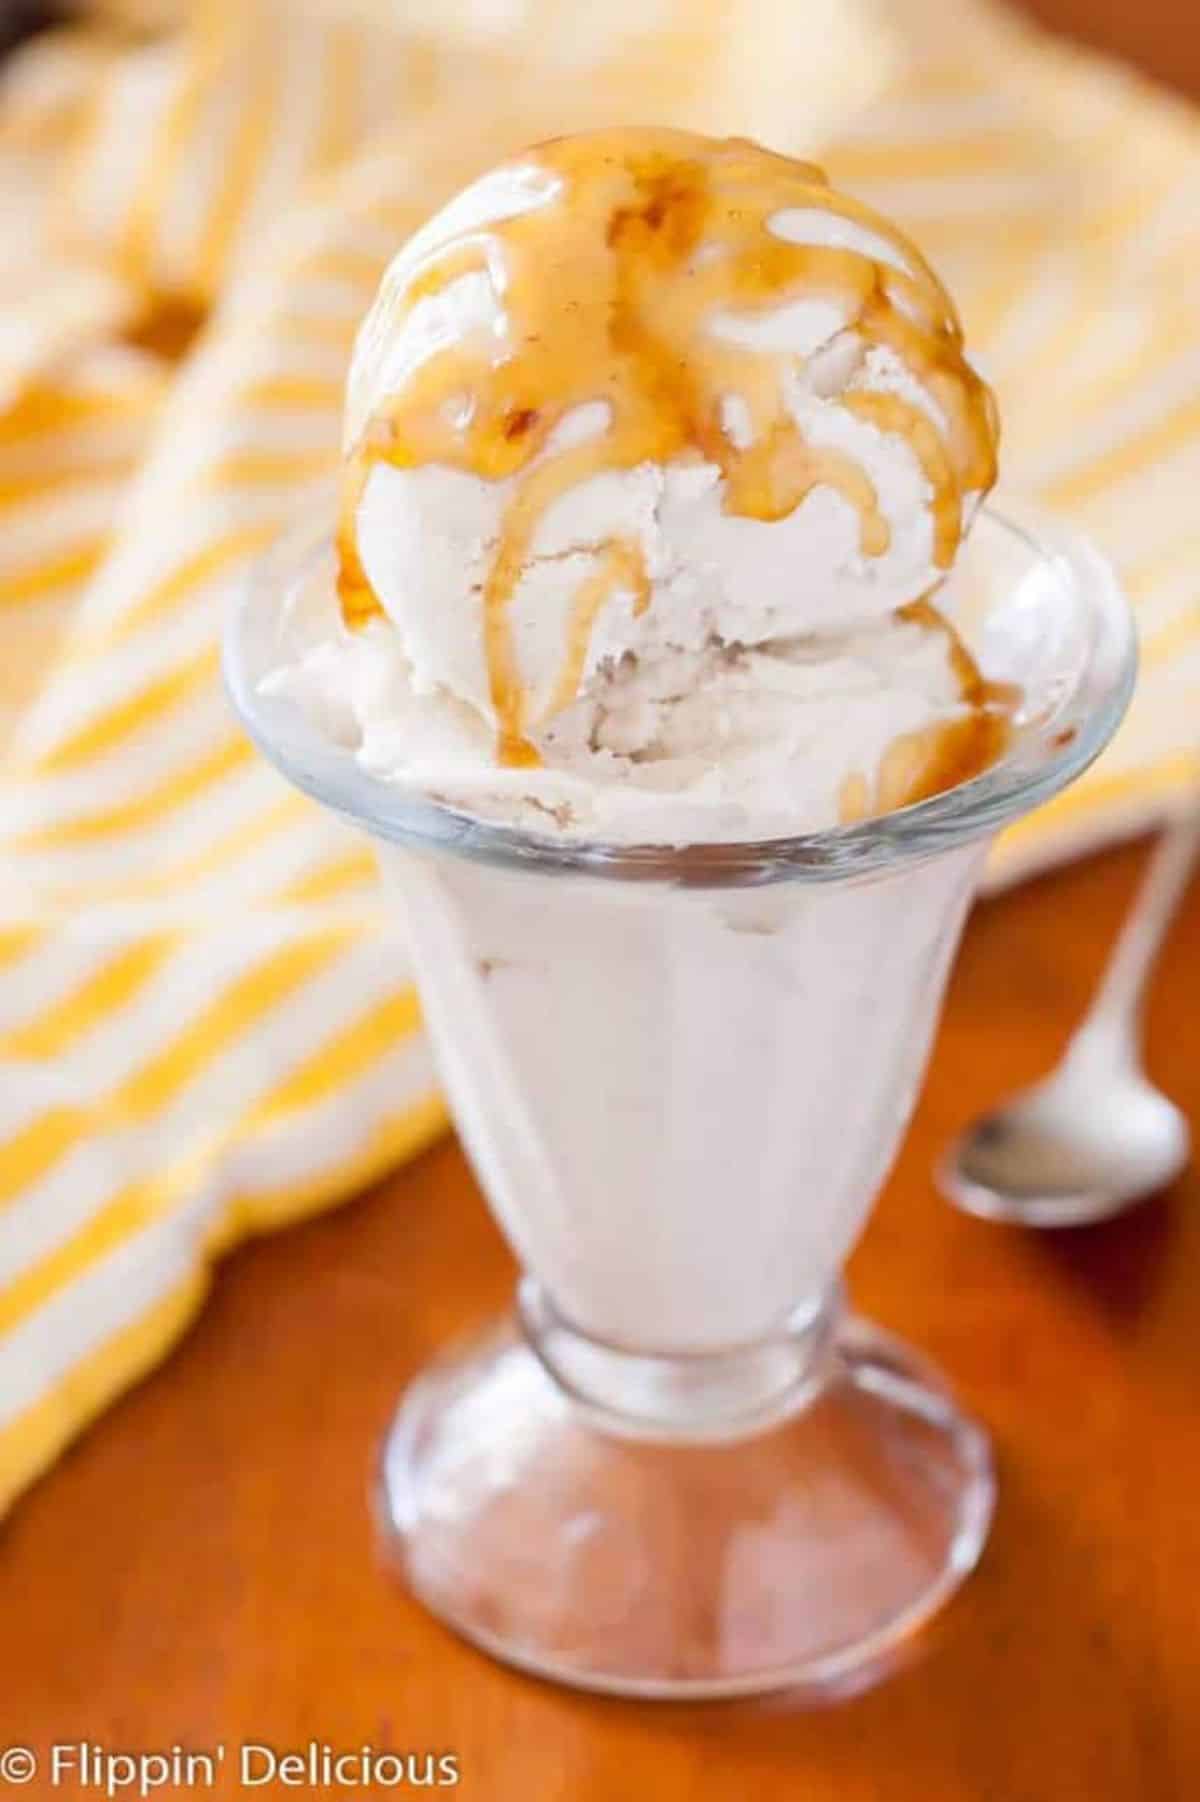 Deliicous Honey and Vanilla Ice Cream in a glass cup.